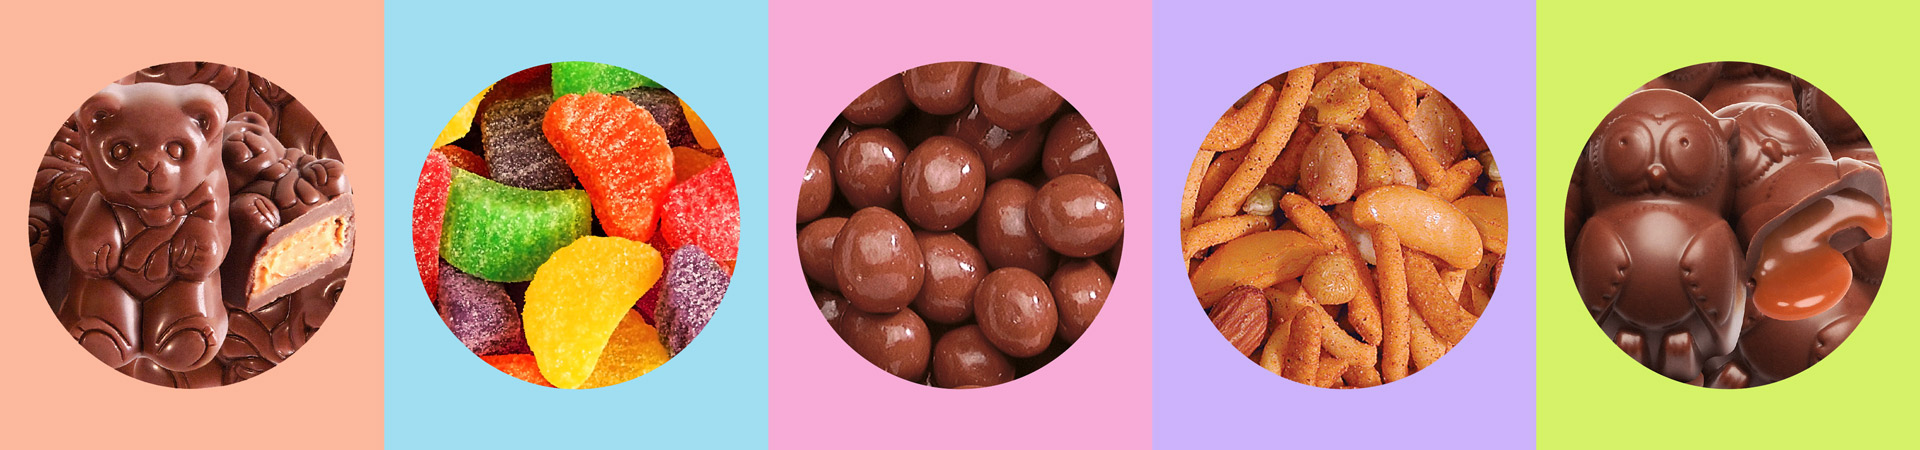  a colorful banner of chocolate peanut butter bears, fruit slices, chocolate covered peanuts, hot cajun crunch, and dulce de leche owls 